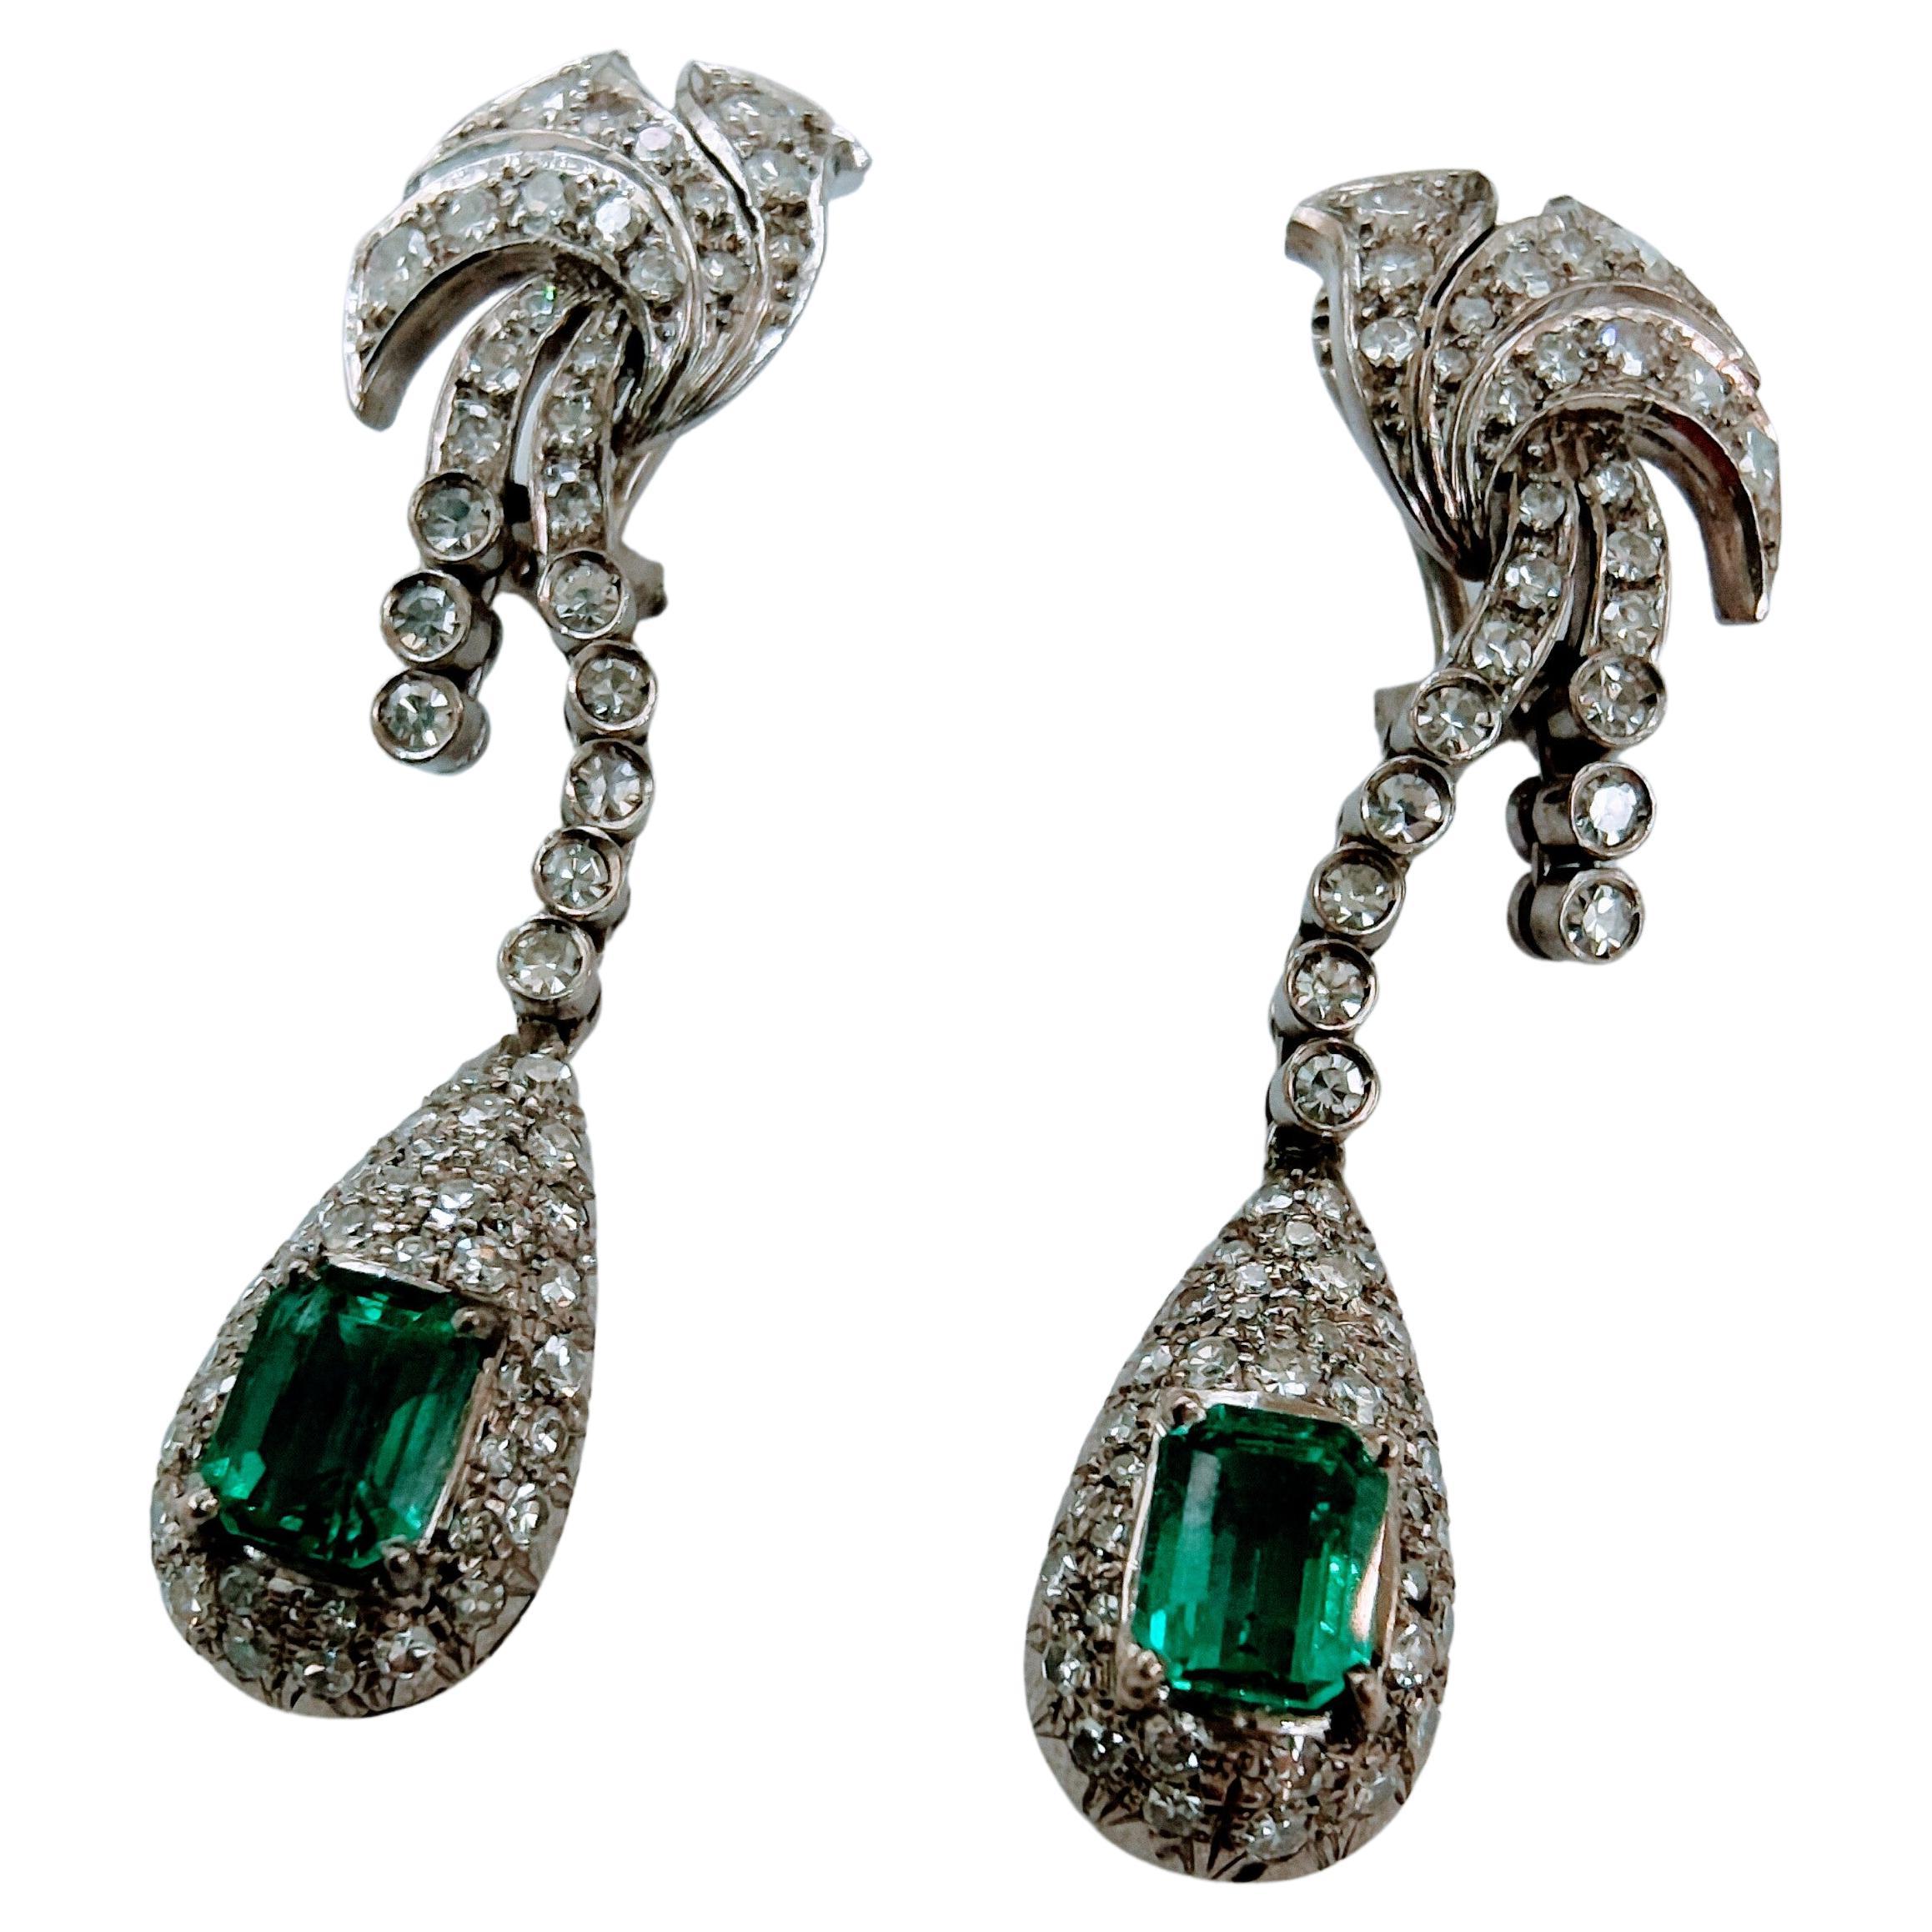 Impressive earrings art-deco with omega system long and waterfall shape. Made White Gold 18 Karats weight 12.7 grams. The Colombian Emeralds of beautiful color and transparency of 6.70 x 5.00x 4.30mm = 2.10 total carats the pair and Diamond Curd